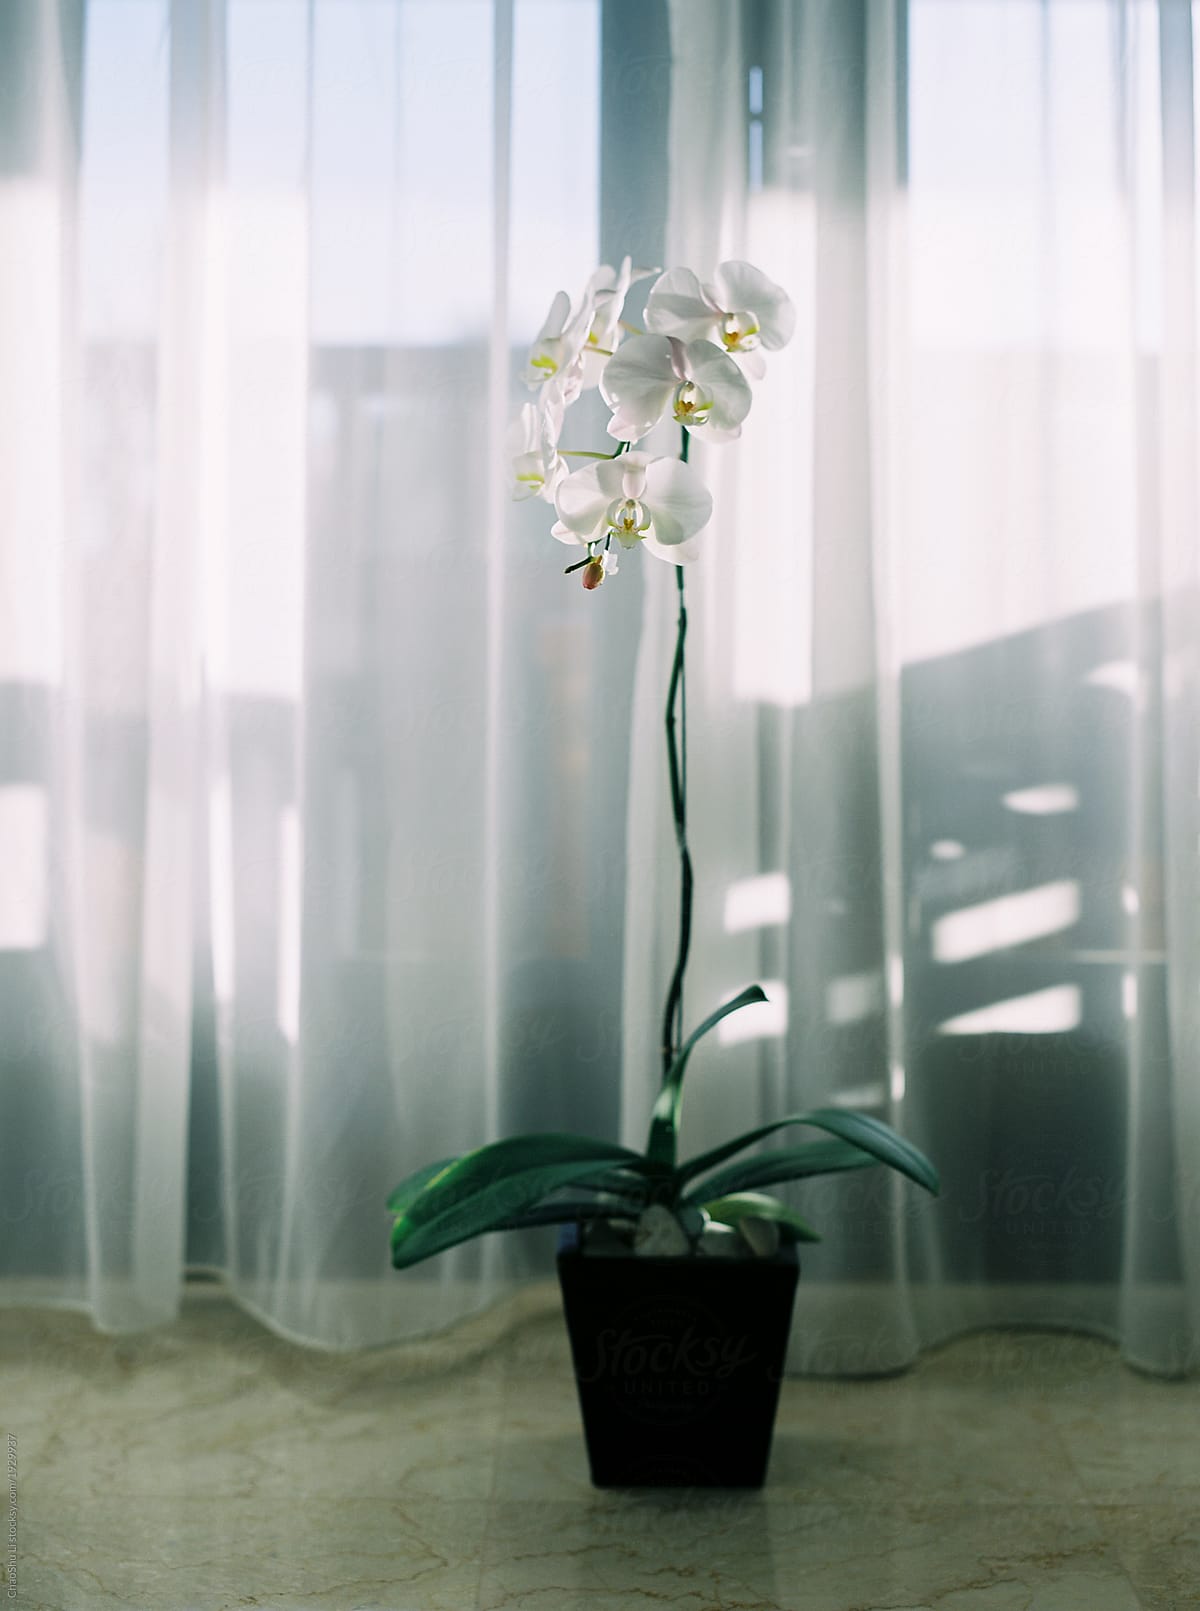 Clean comfortable orchids in sunlight transilluminated window background\
 . shot by 120 films